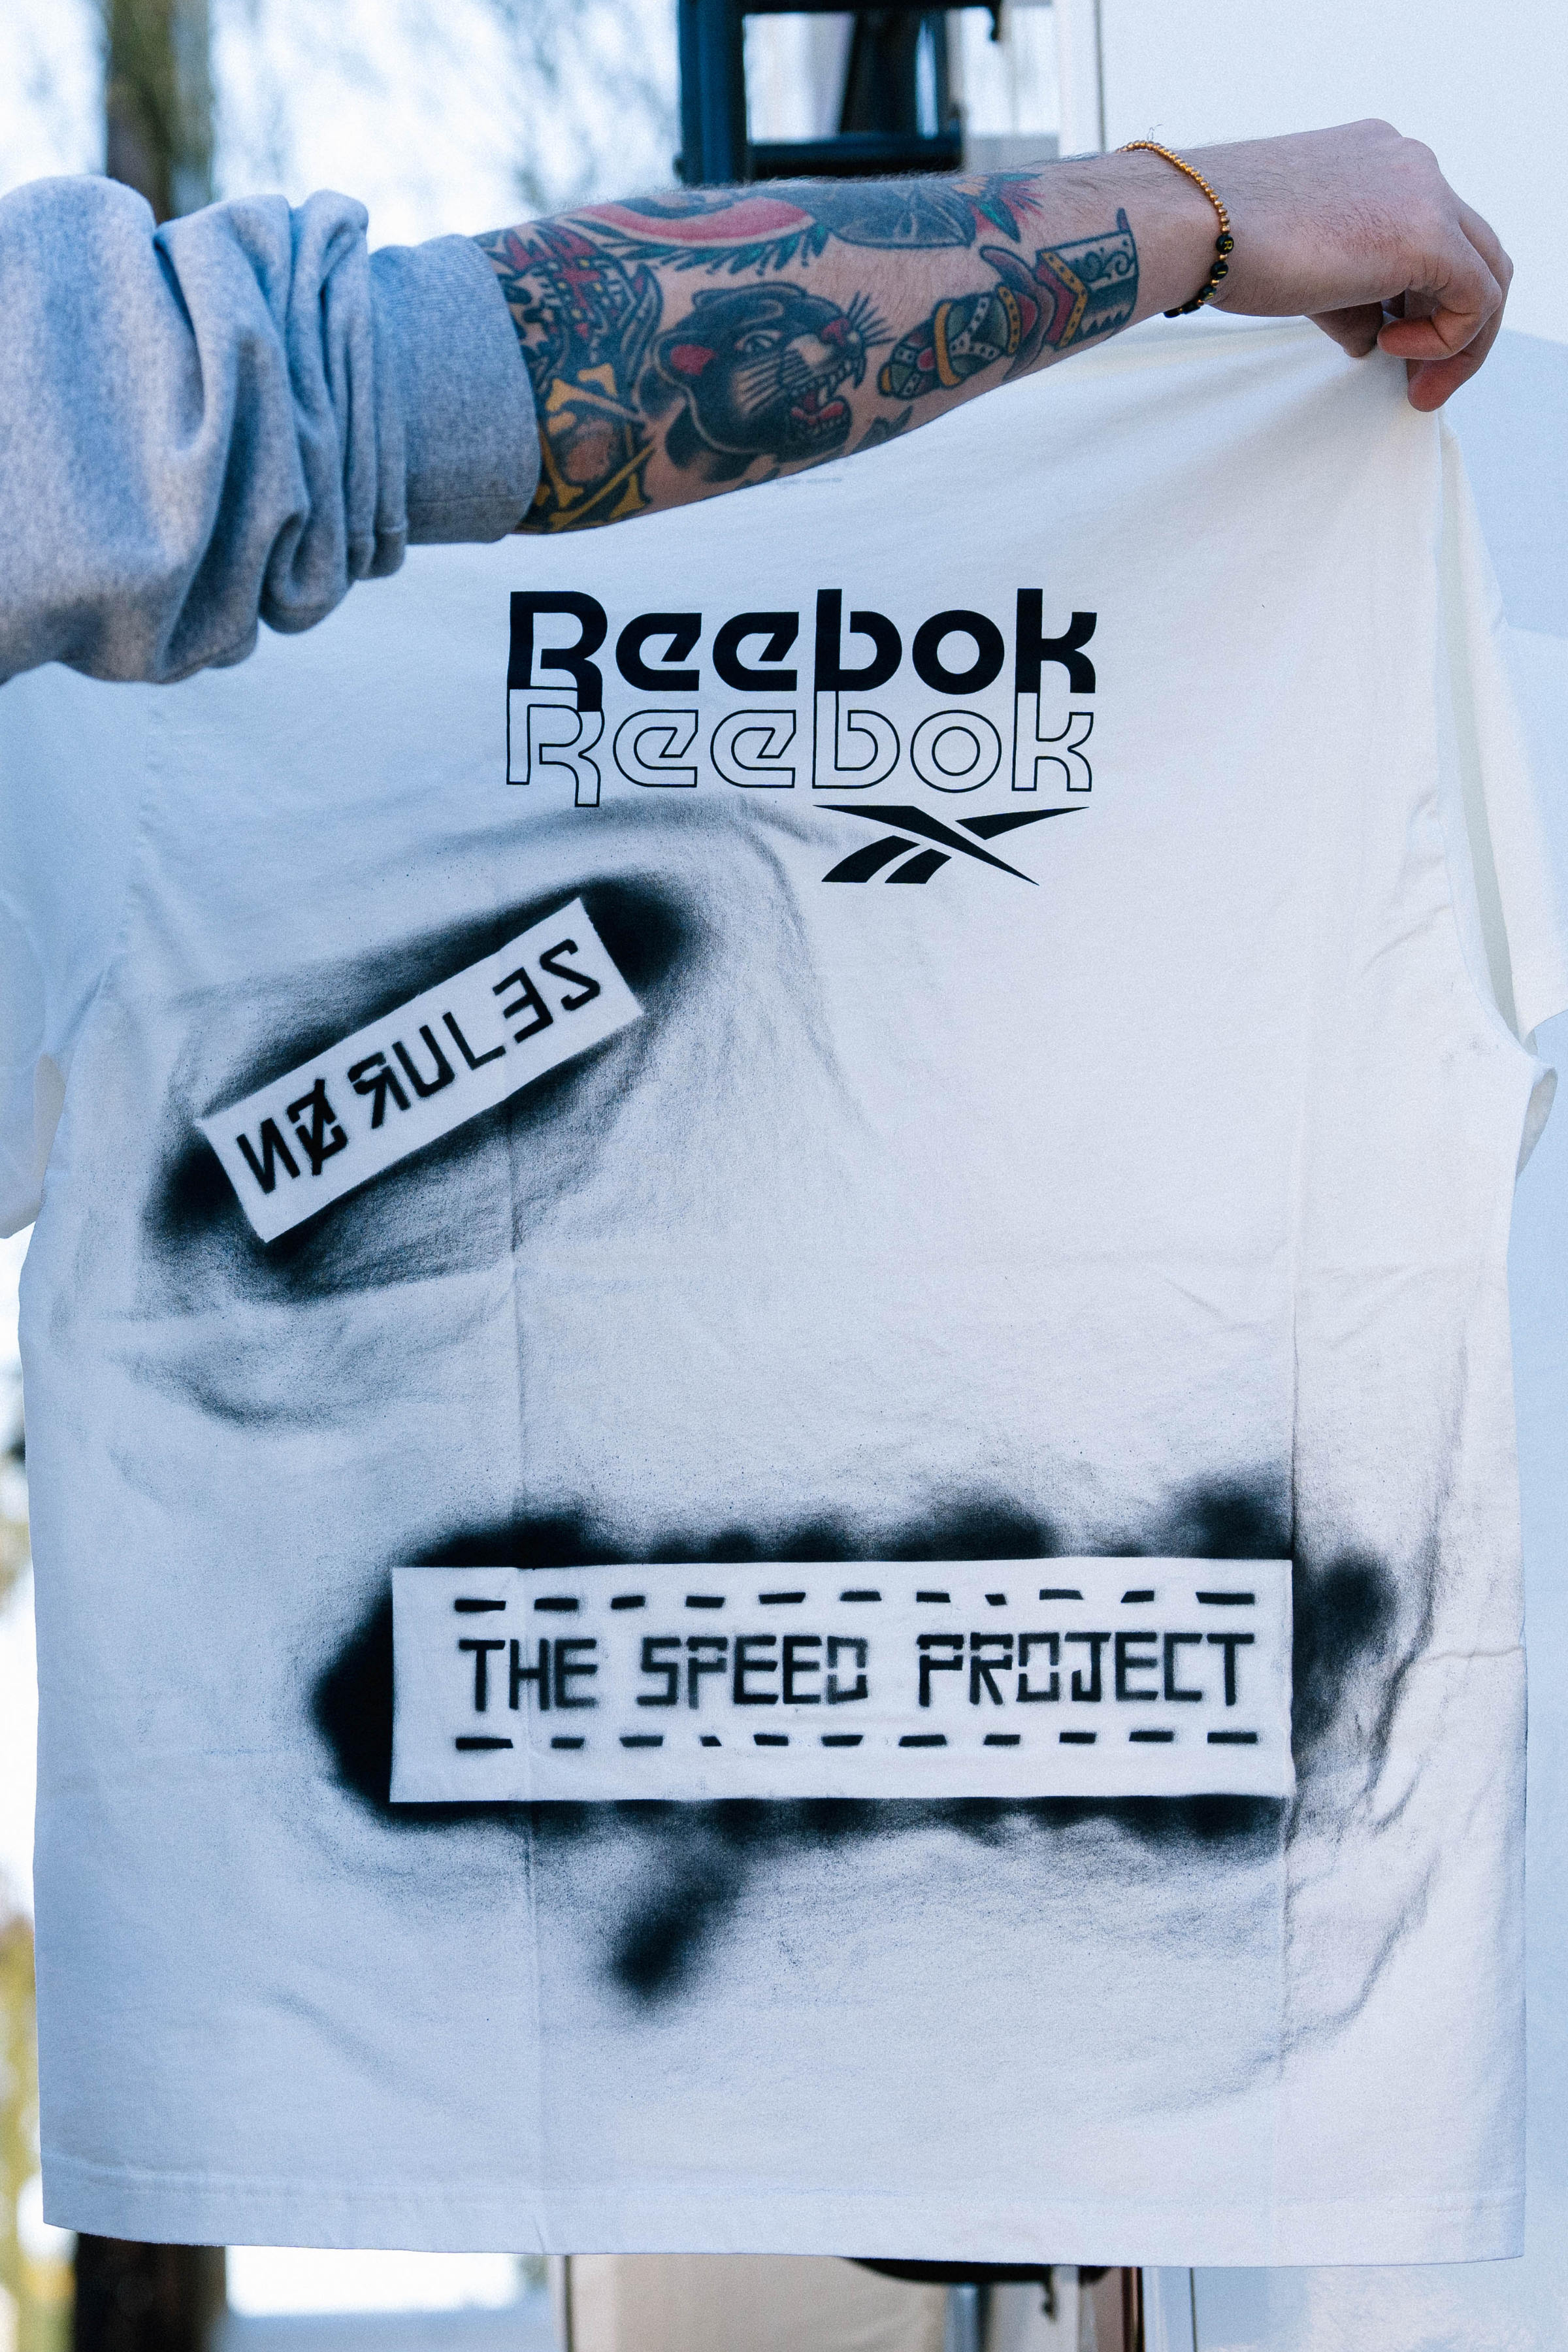 T-shirt spray painted 'Reebok' and 'Speed Project'